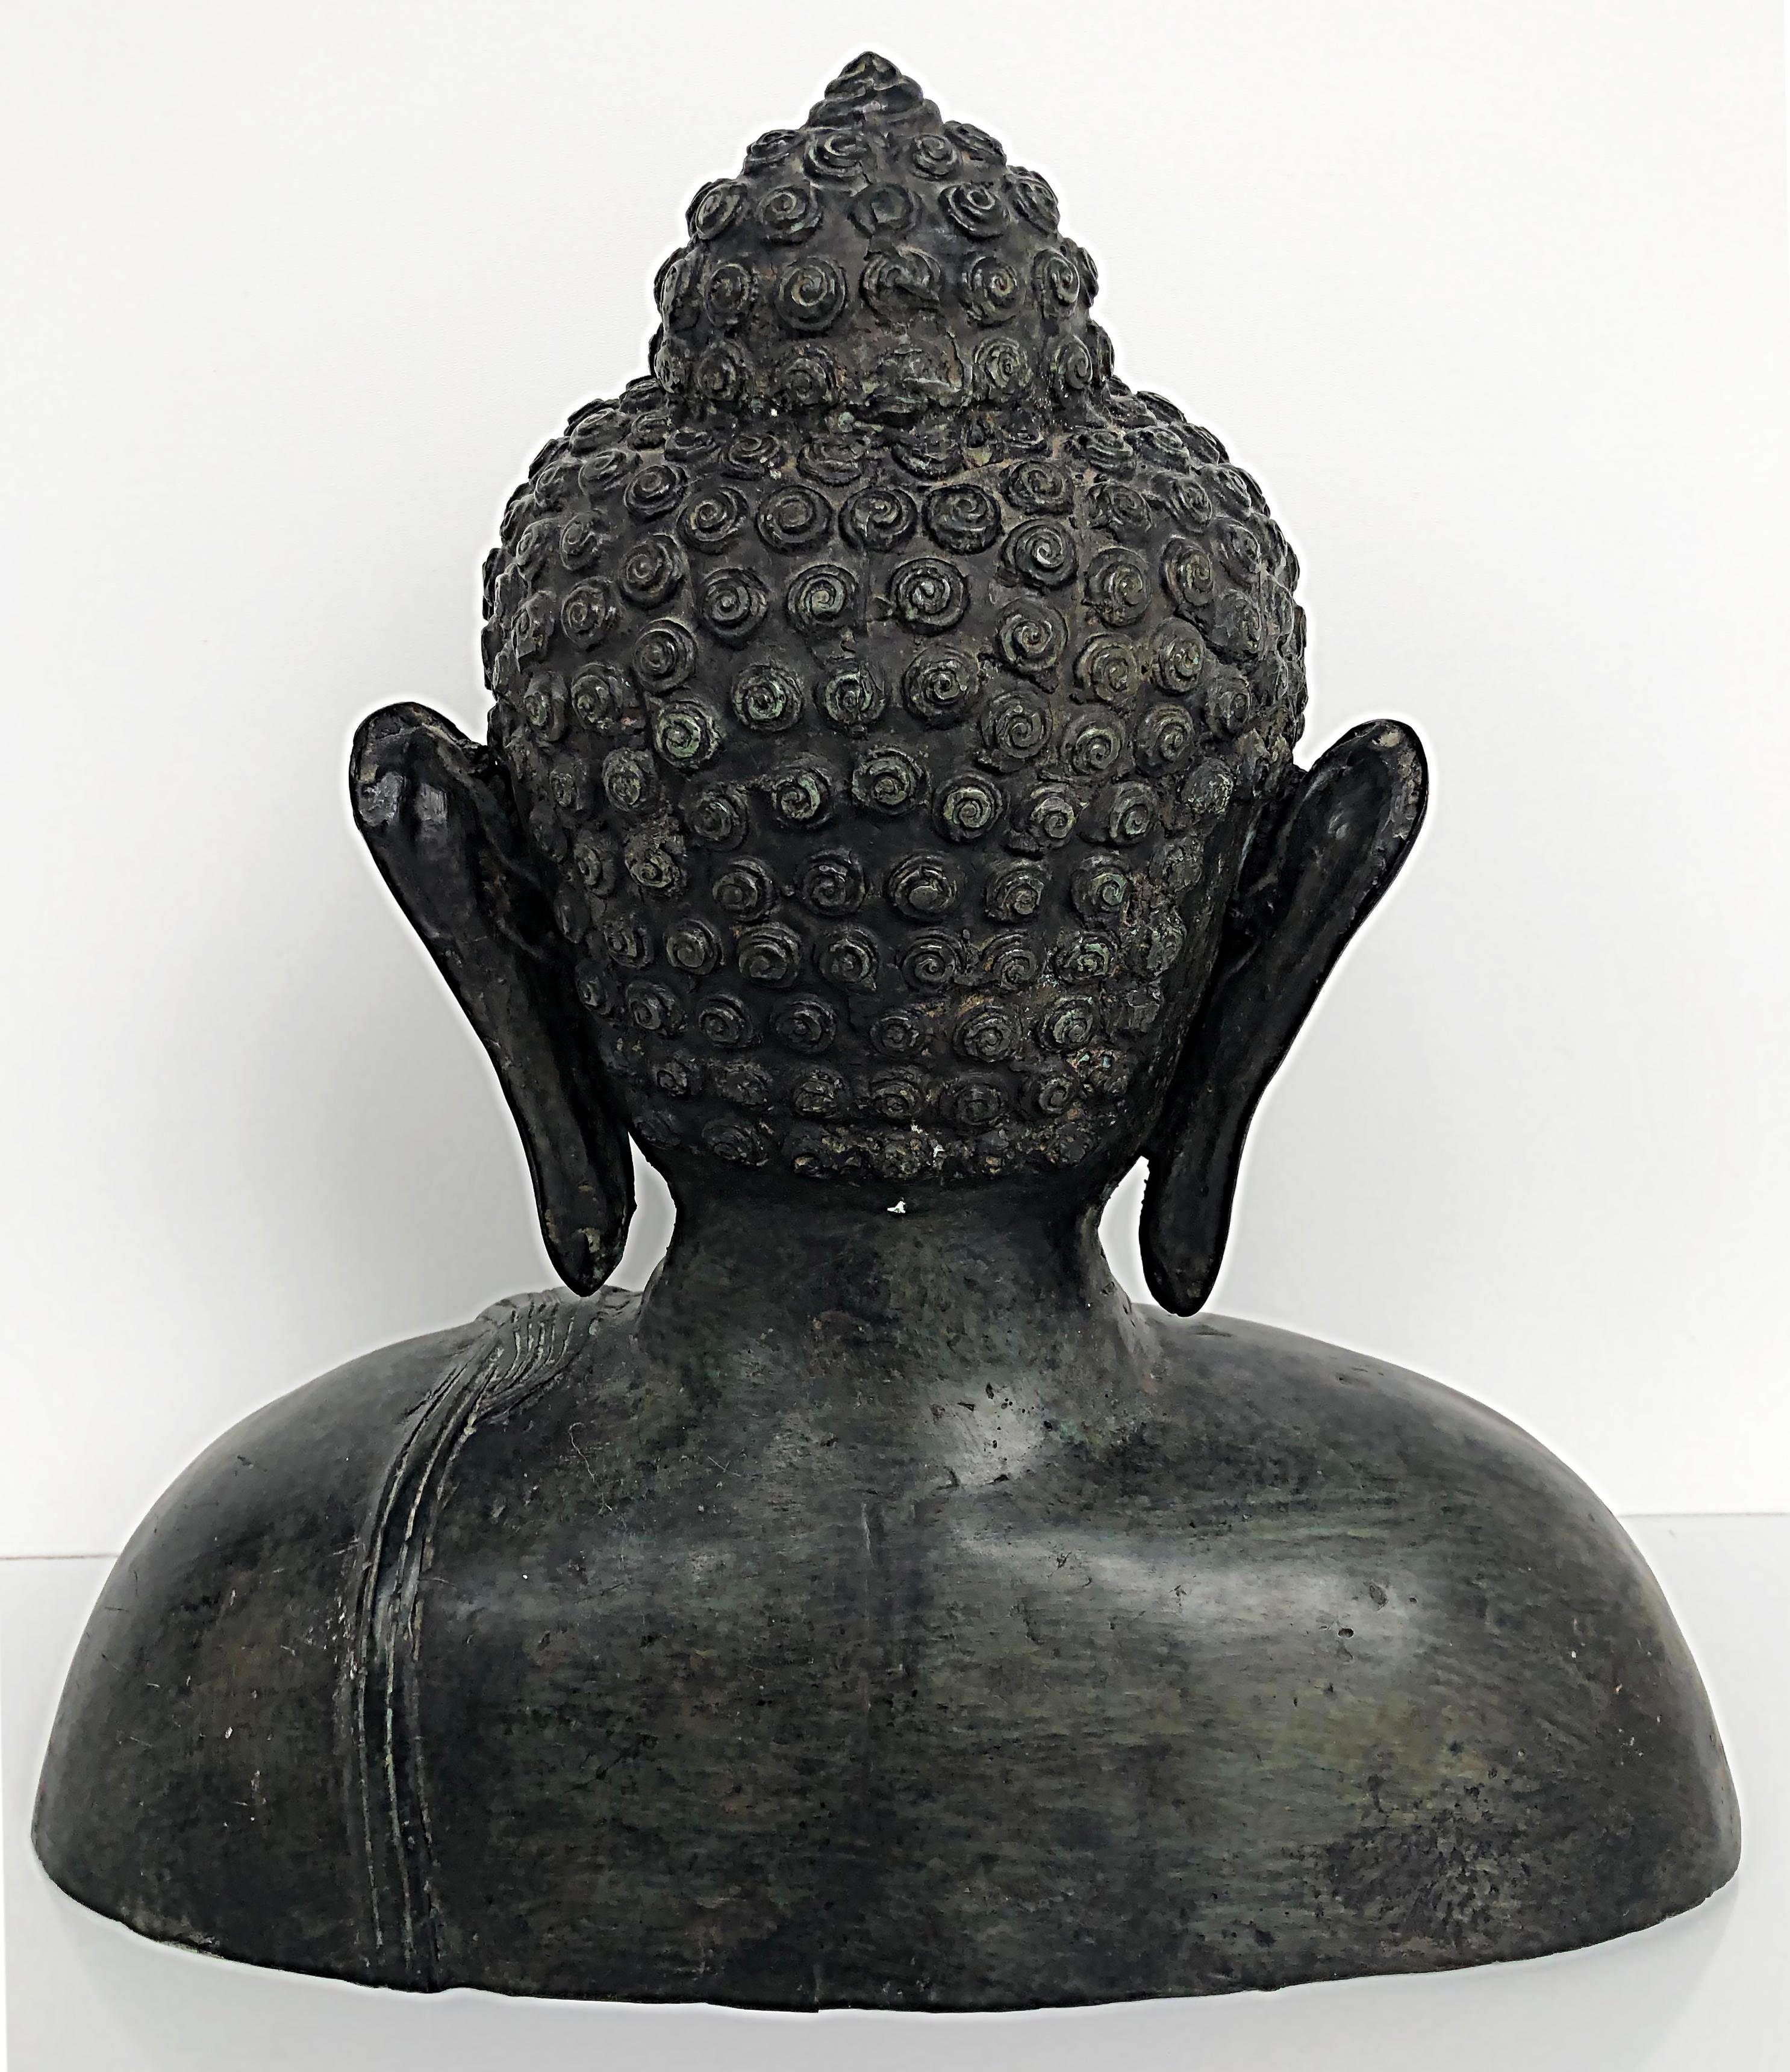 Bronze Thailand Figurative Buddha Sculpture Bust, 20th Century with Patina For Sale 5